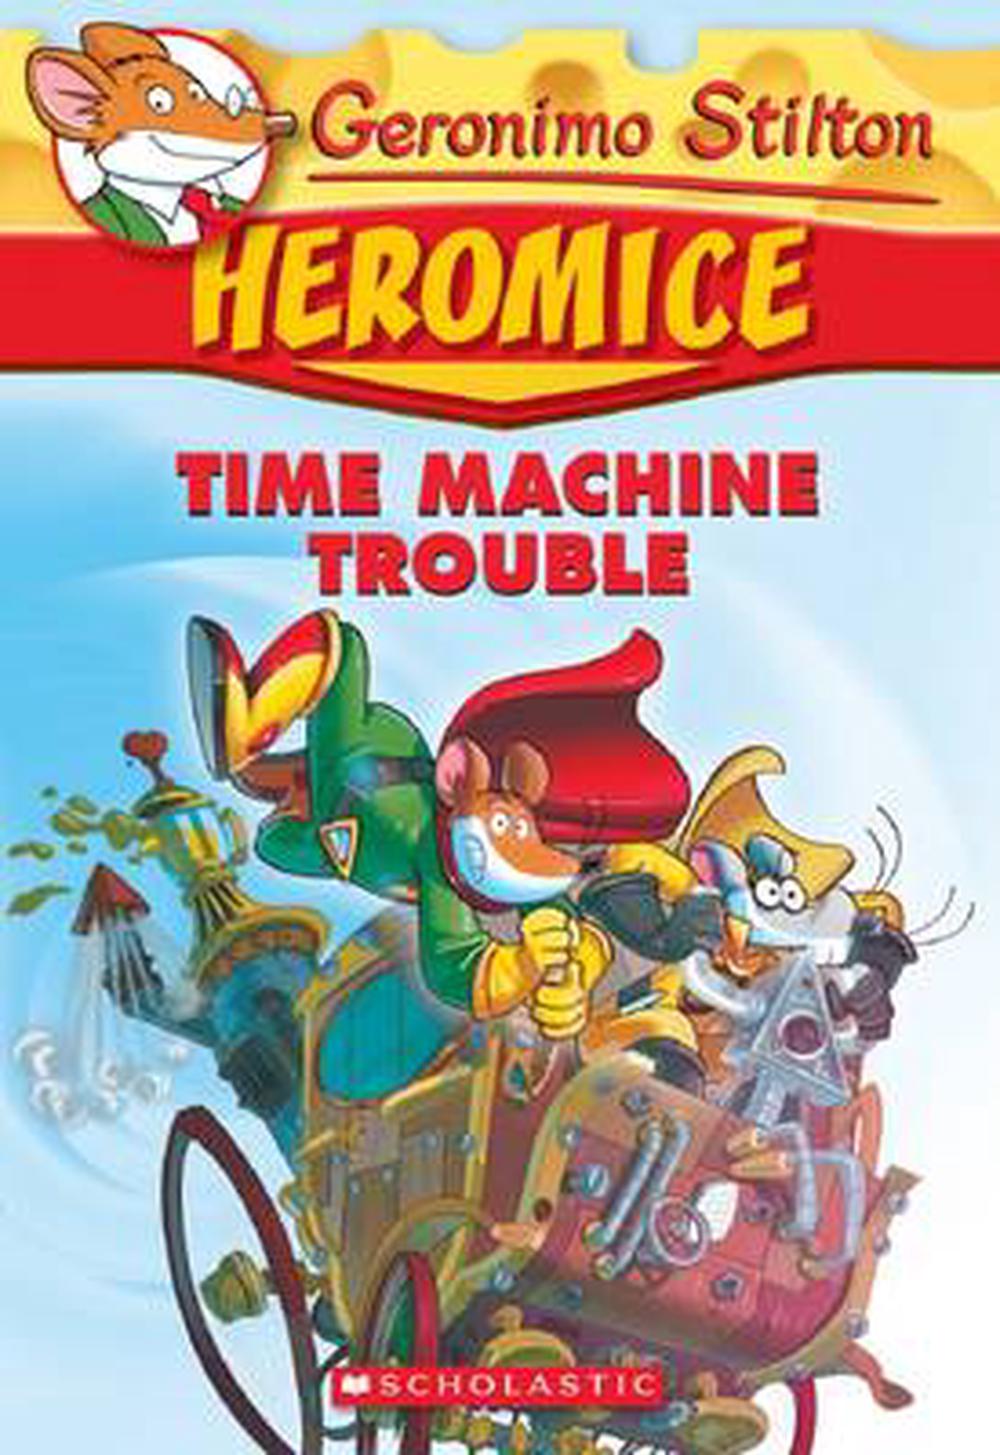 Heromice #7: Time Machine Trouble by Geronimo Stilton Paperback Book